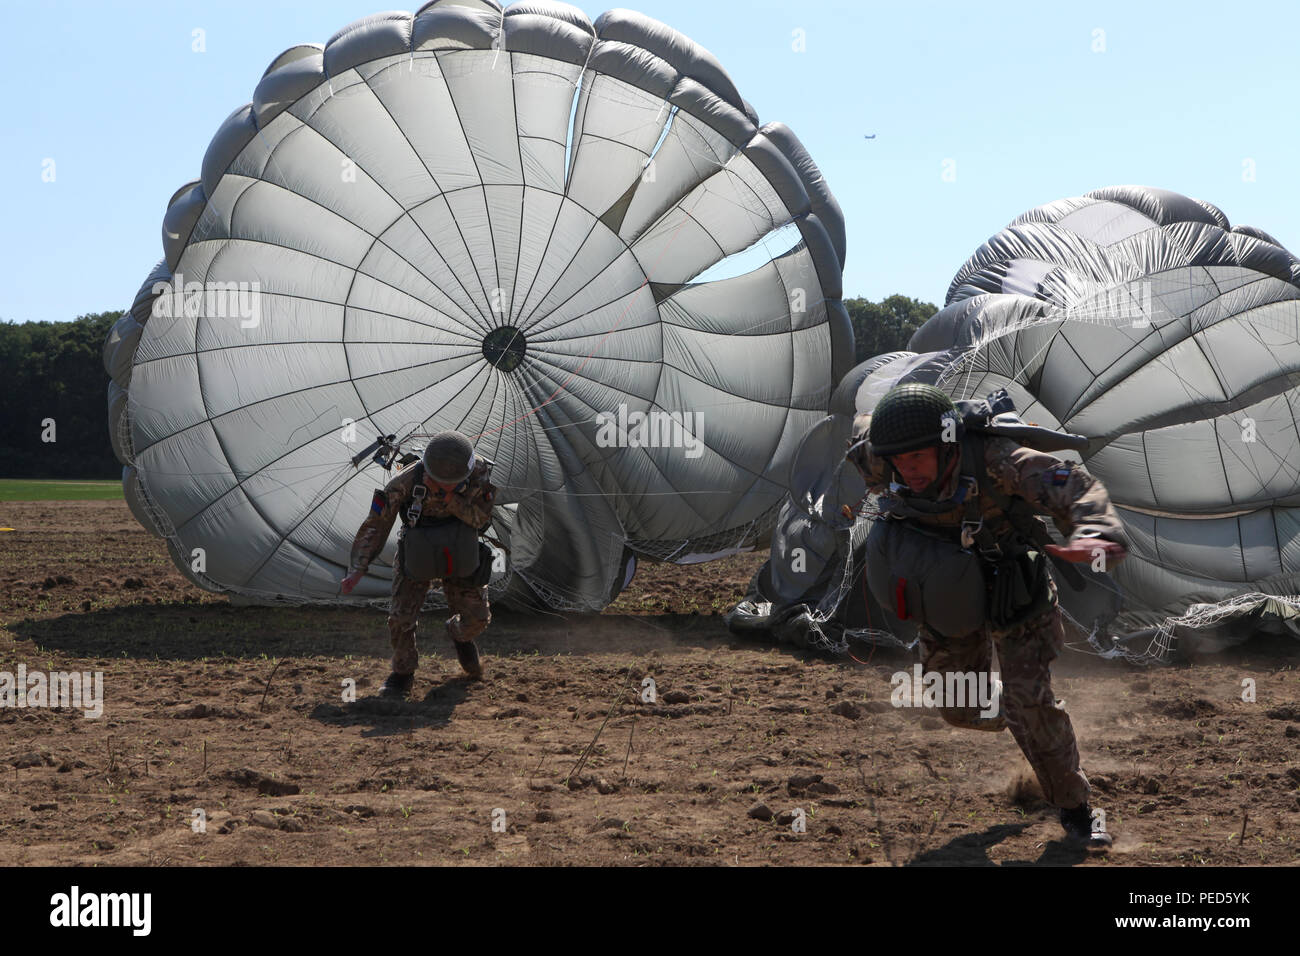 British paratroopers run toward the 'X' on the drop zone during Leapfest 2015 in West Kingston, R.I., Aug. 1, 2015. Leapfest is an International parachute competition hosted by the 56th Troop Command, Rhode Island National Guard to promote high level technical training and esprit de corps within the International Airborne community. (U.S. Army Photo by Spc. Joseph Cathey/Released) Stock Photo